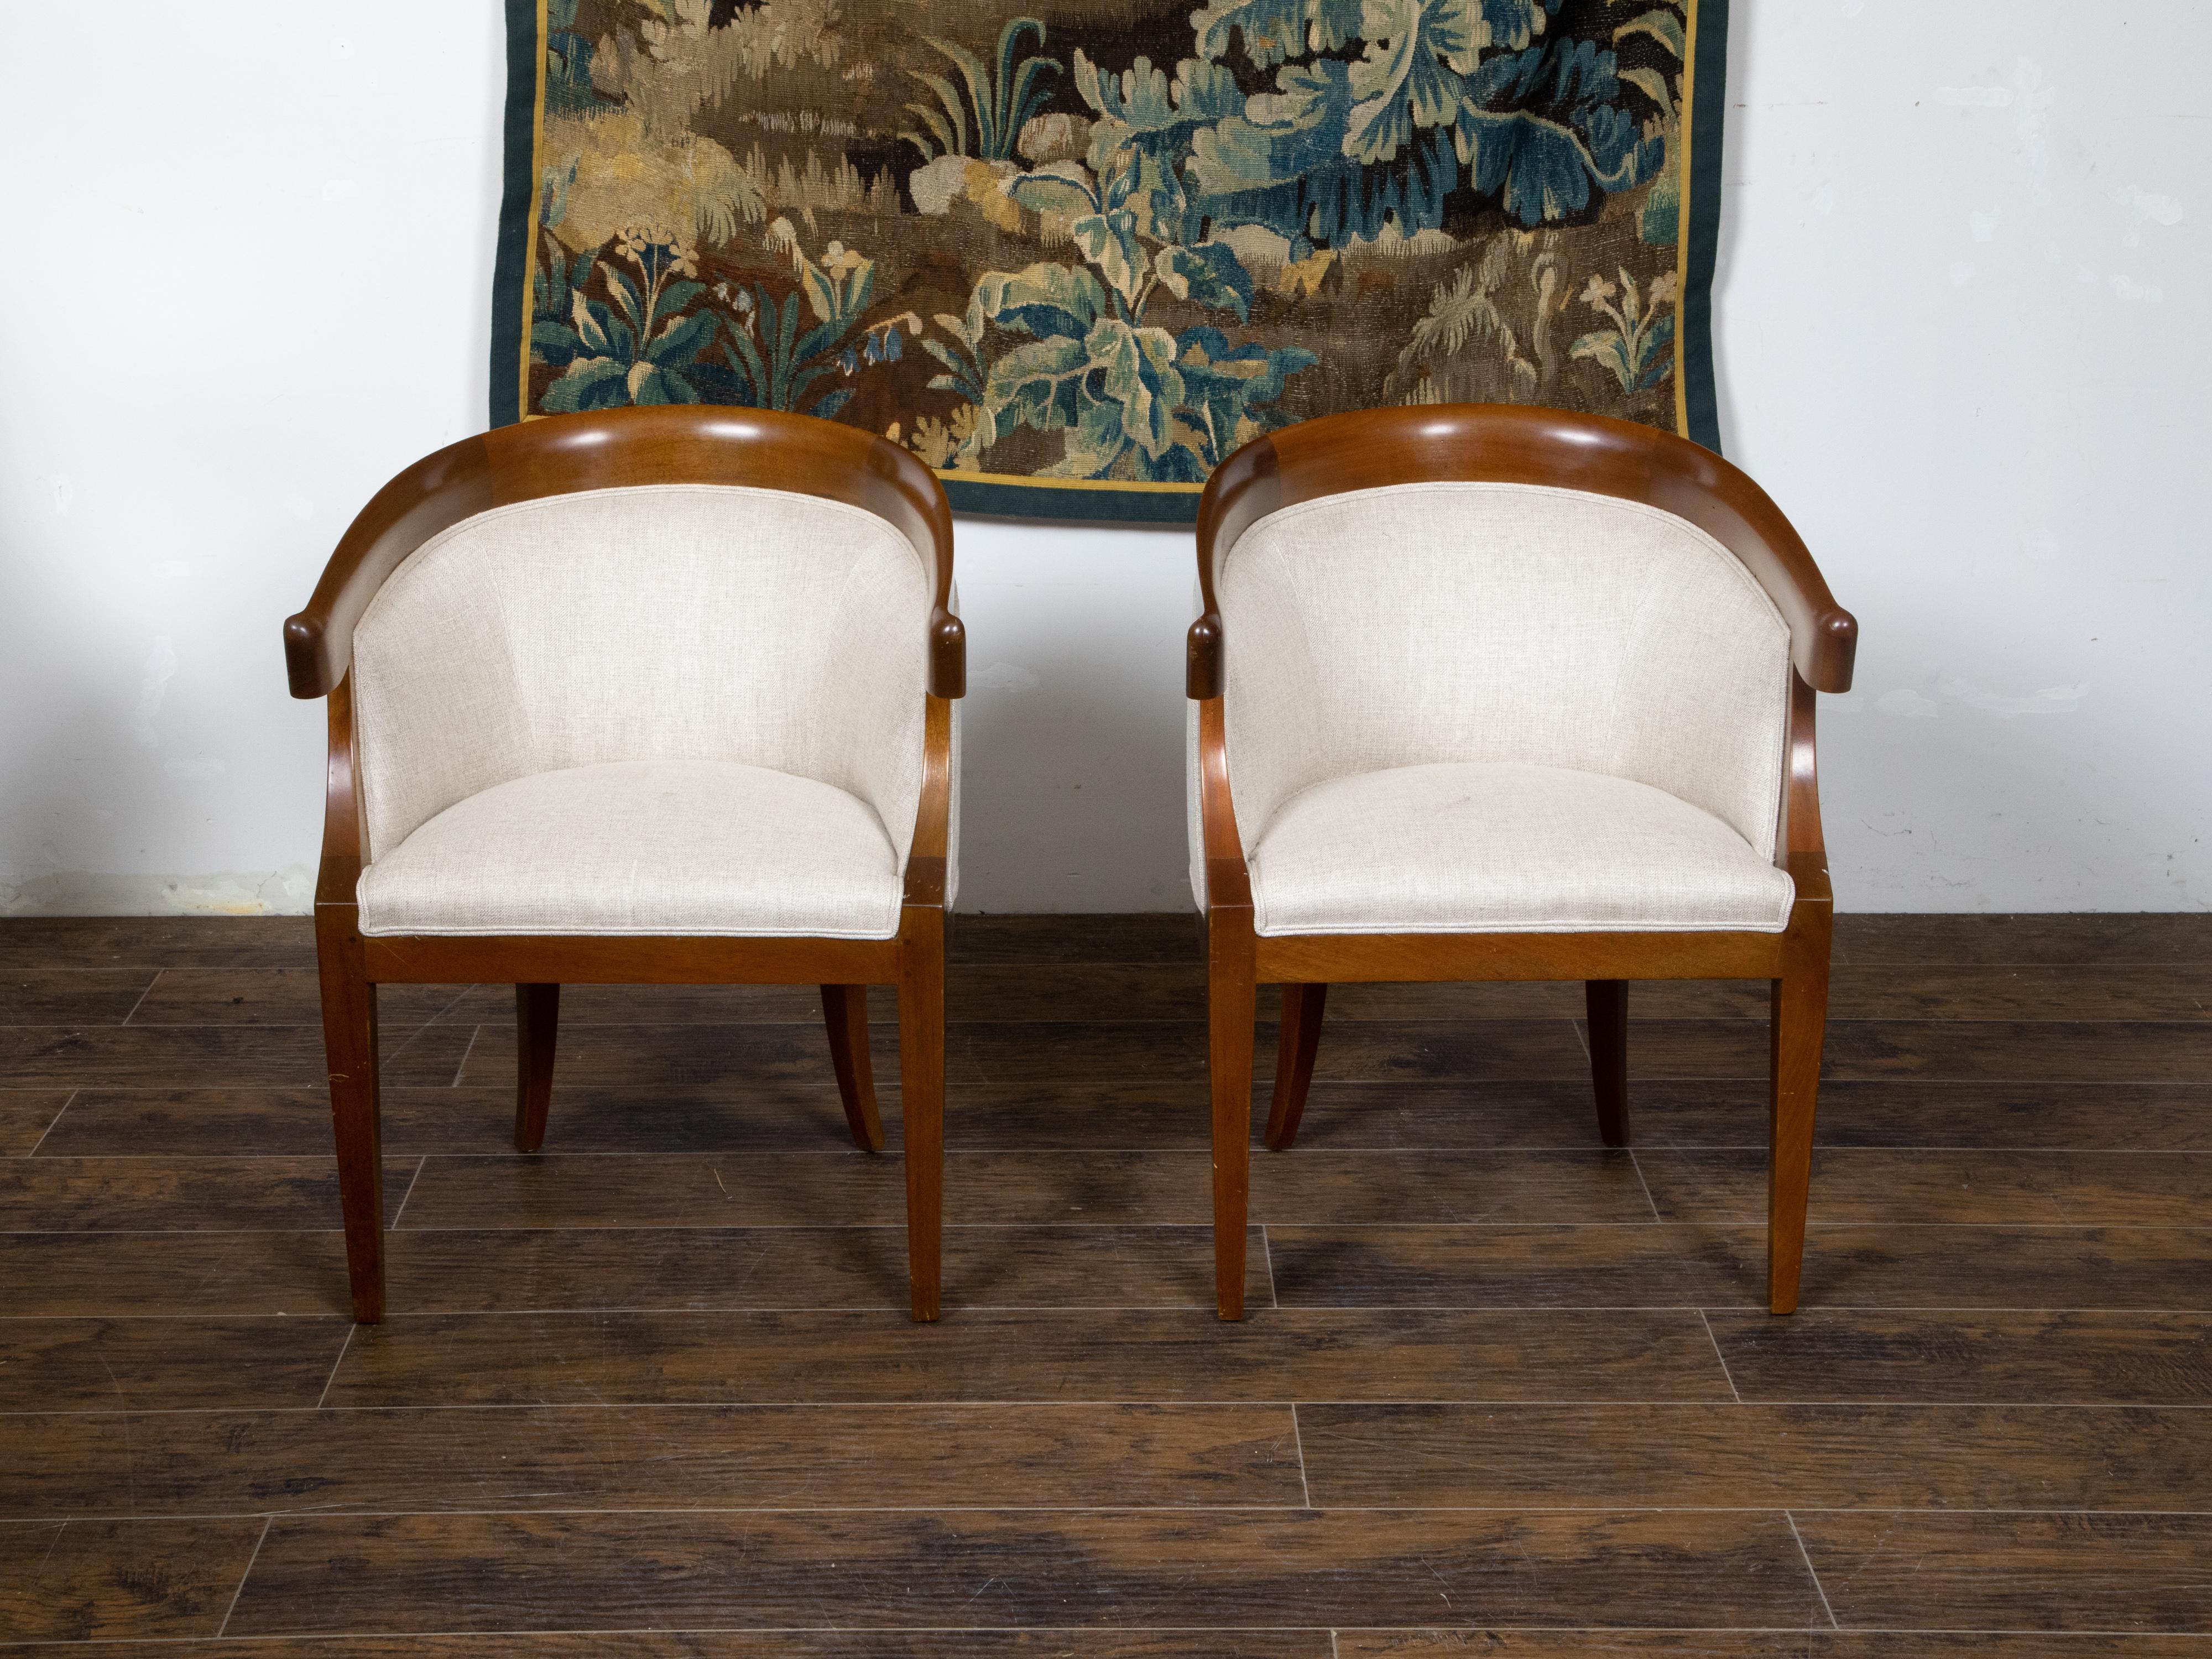 A pair of French Art Deco period walnut armchairs from the early 20th century, with horseshoe back, saber legs and linen upholstery. Created in France during the Art Deco period in the second quarter of the 20th century, each of this pair of walnut